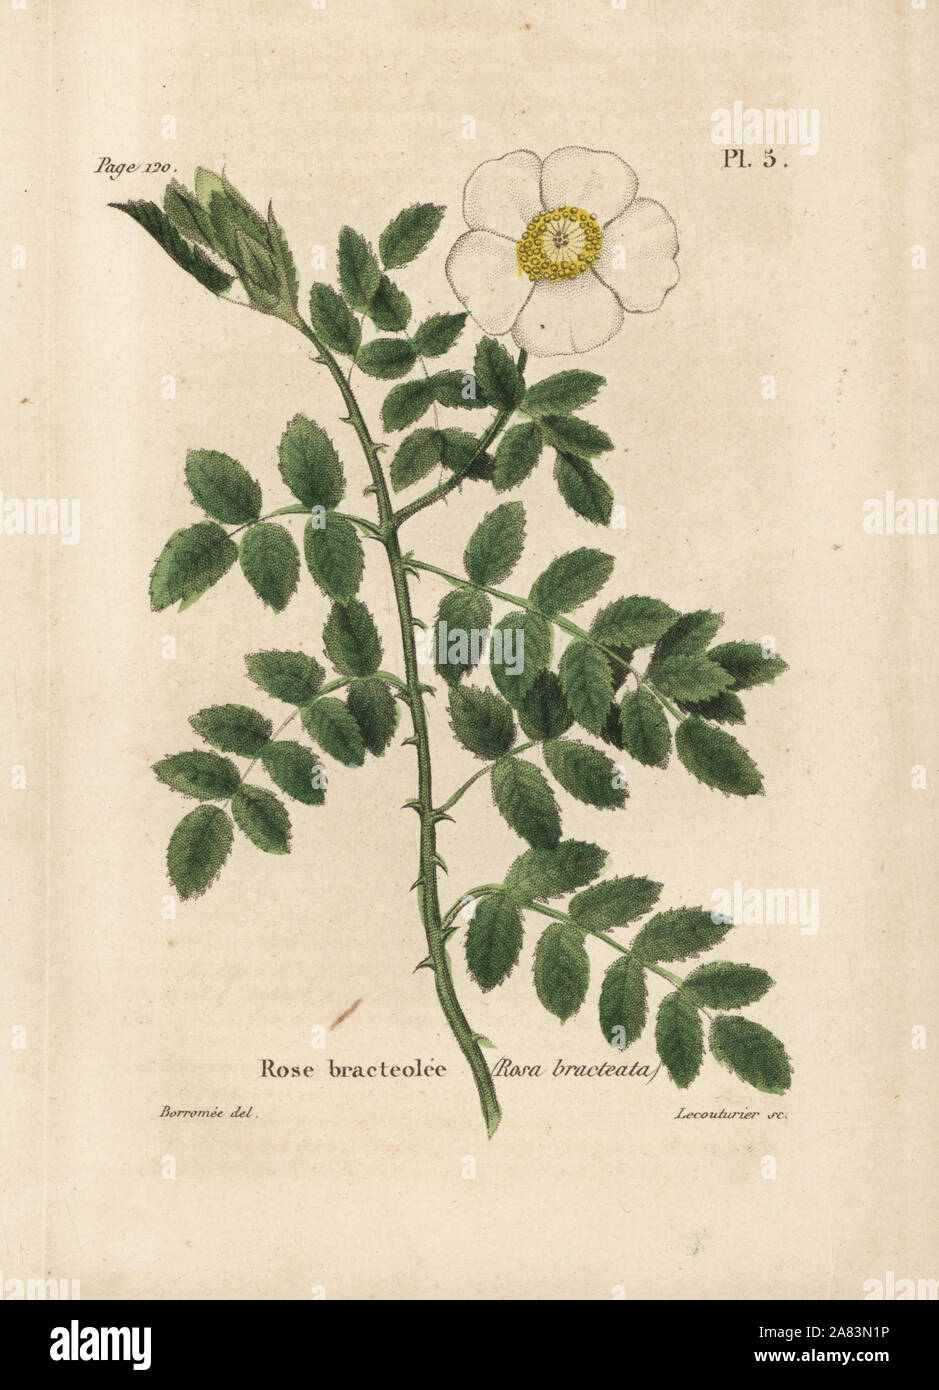 Bracteate rose, Rose bracteolee, Rosa bracteata. Handcoloured lithograph by Lecouturier after a botanical illustration by Borromee from Pierre Boitard's Rose-Lover's Complete Manual, Roret, Paris 1836. Stock Photo